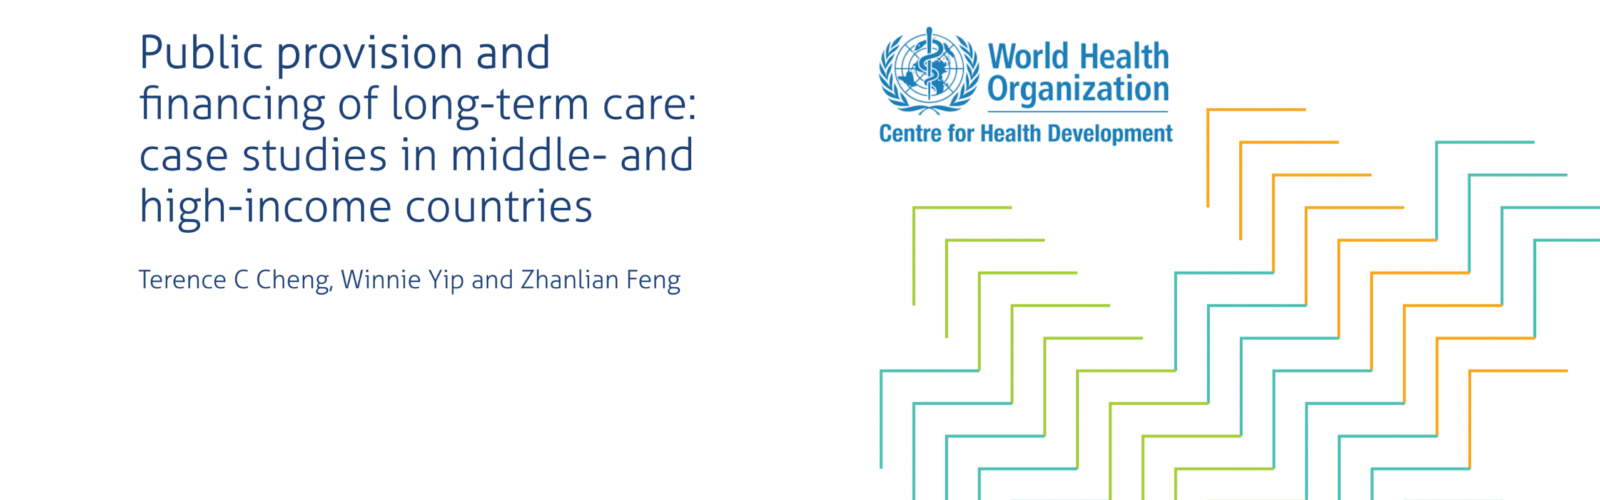 Public provision and financing of long-term care in middle- and high-income countries